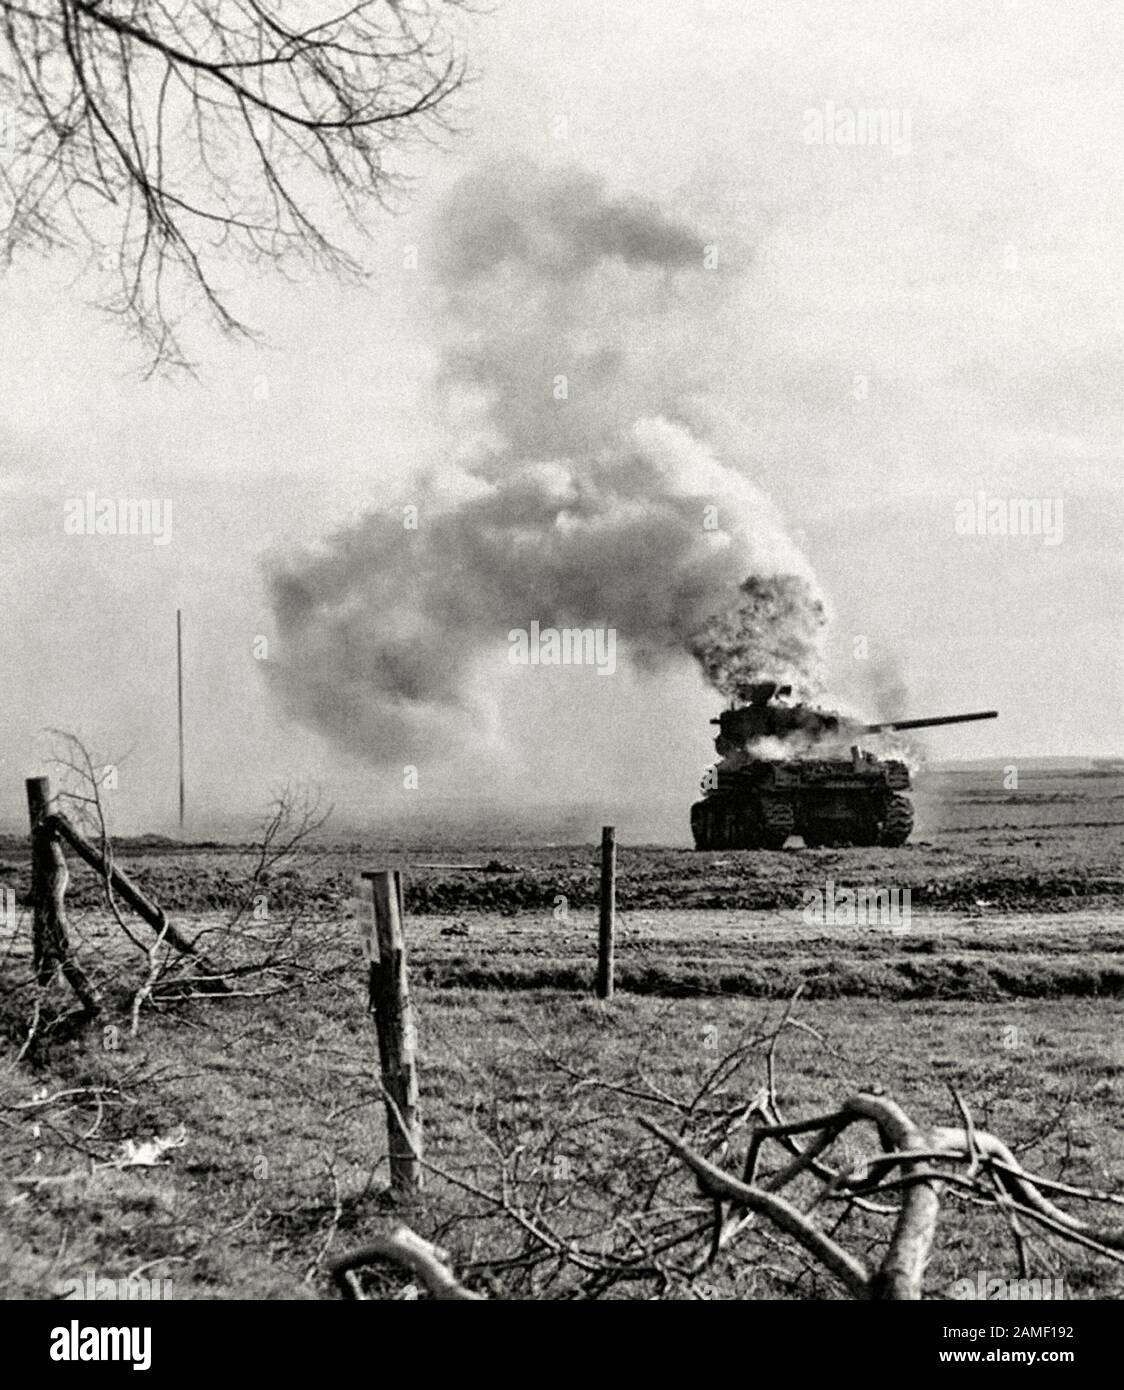 Burning M4A1 (76) W “Sherman” medium tank from the 3rd US tank division, destroyed by German artillery in Bergerhausen, Kerpen, Germany. March 01, 194 Stock Photo